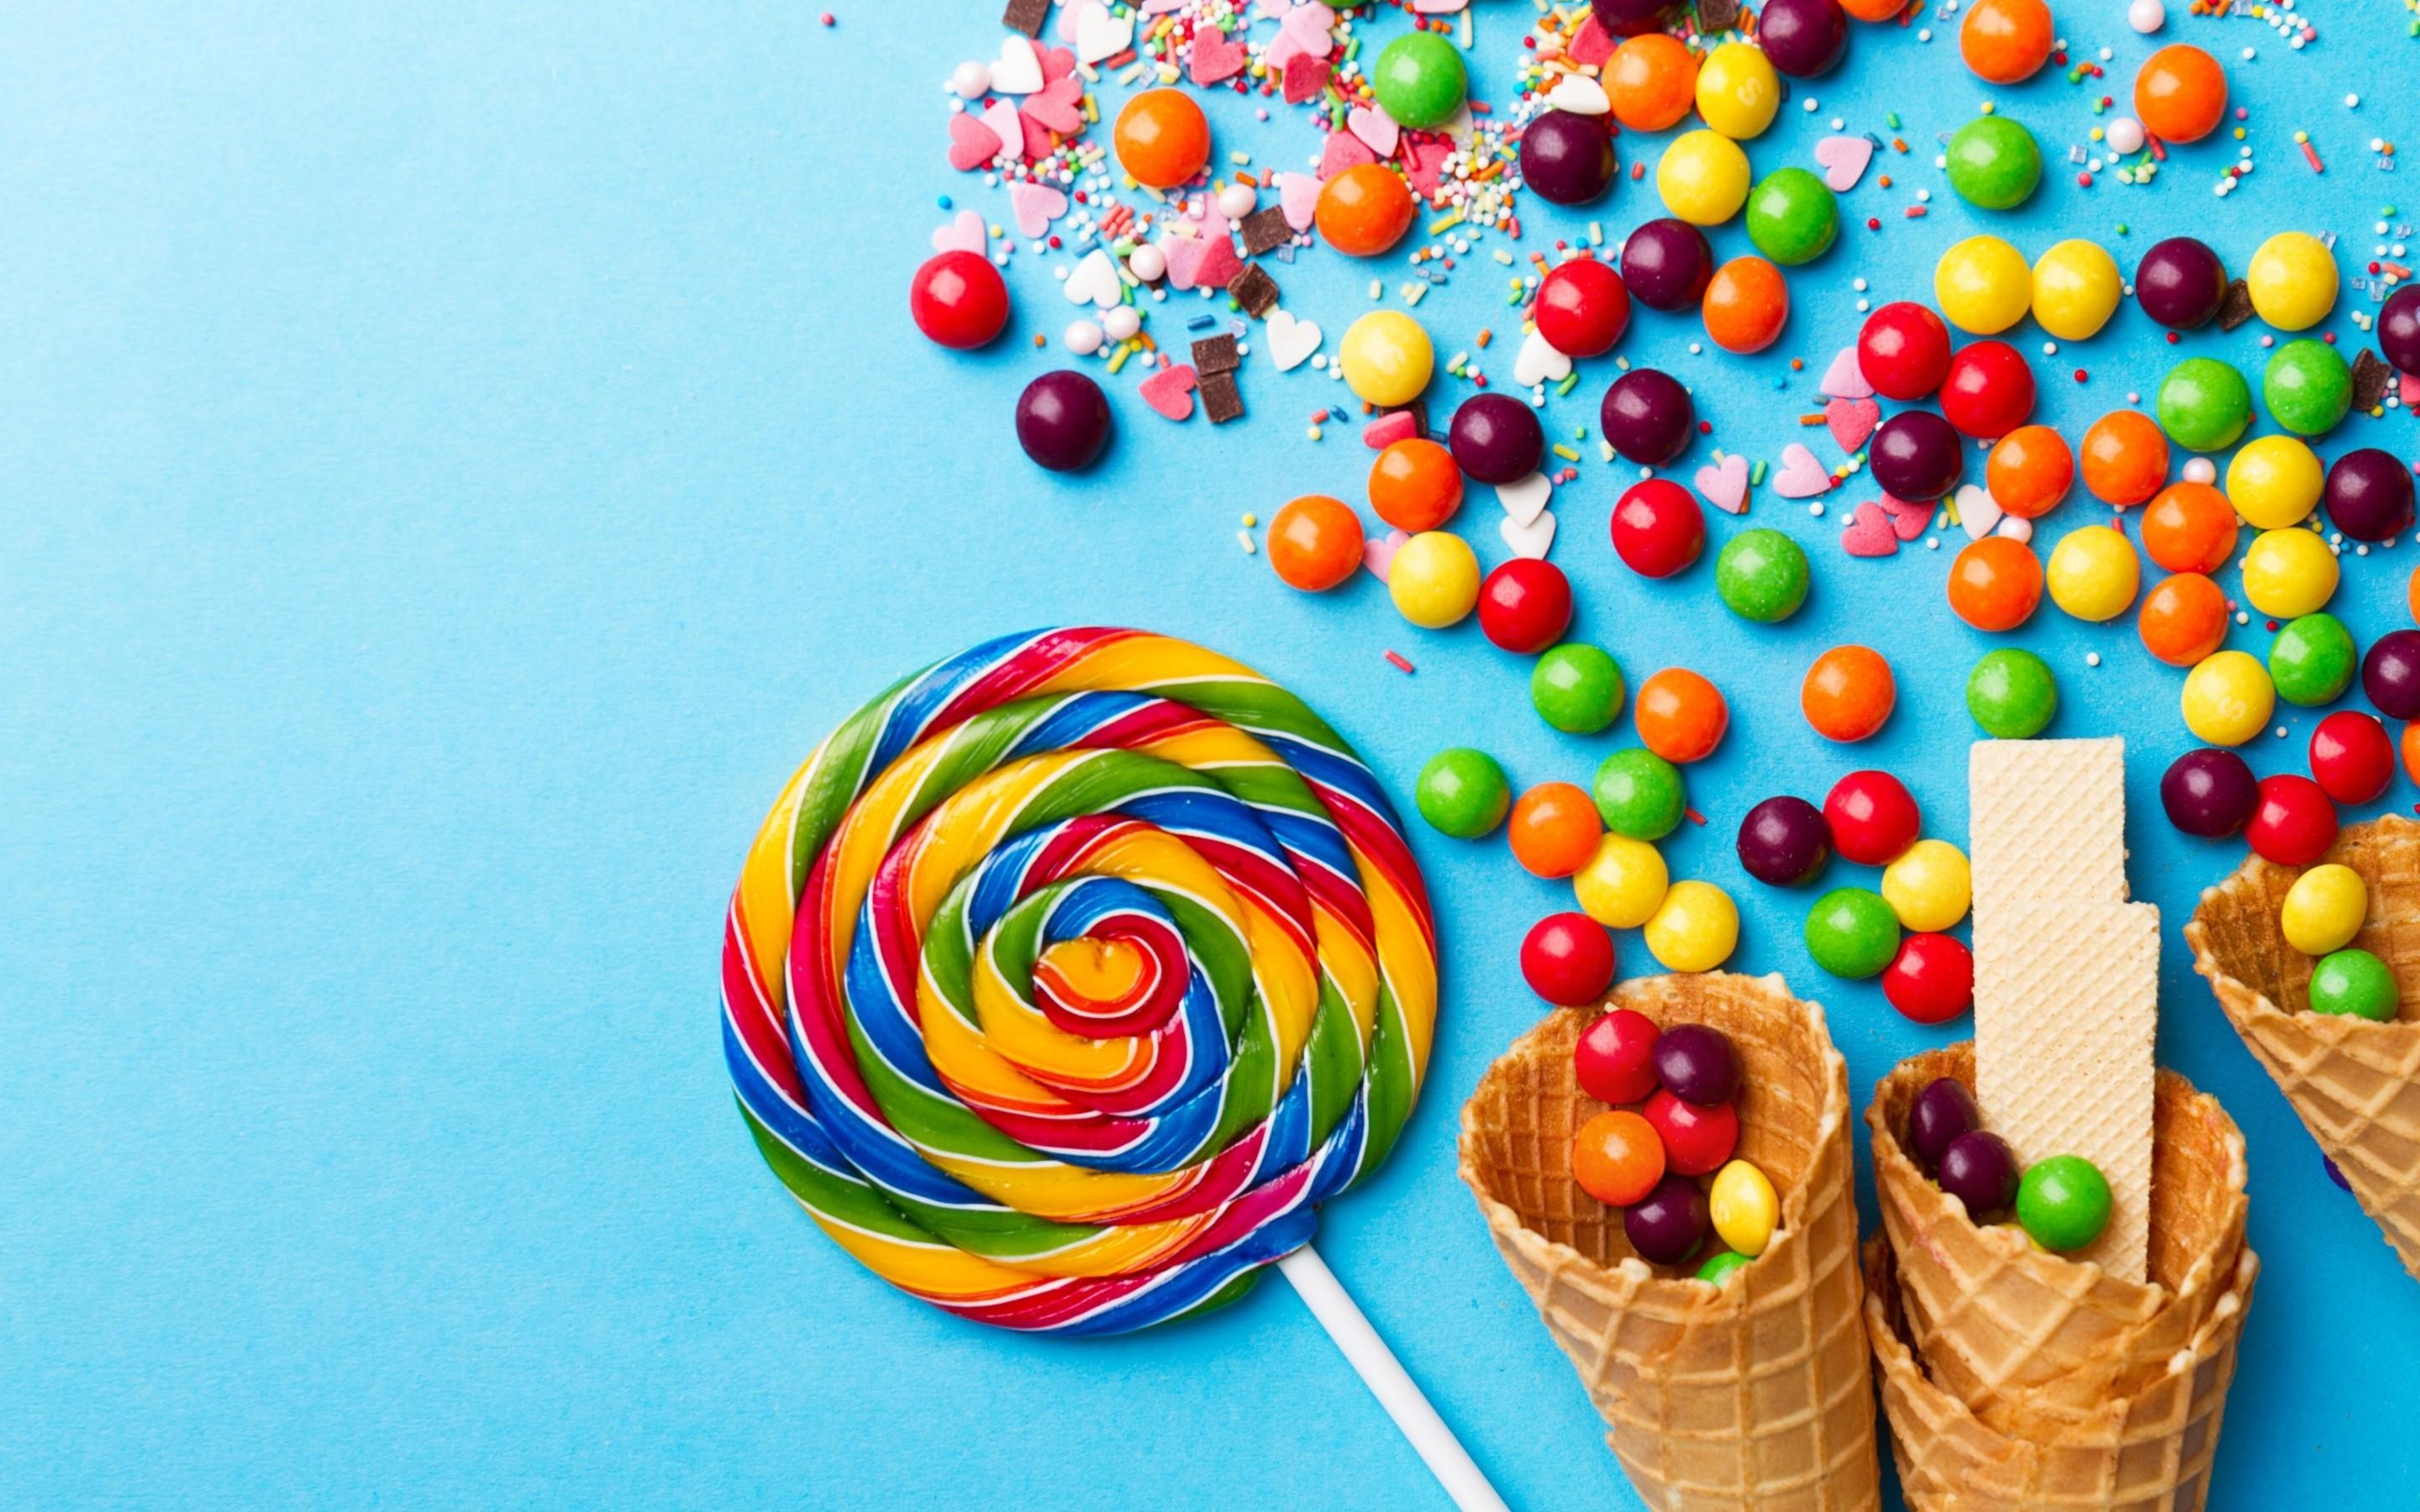 Download 2880x1800 Waffle Cone Candy Lollipop Wallpaper